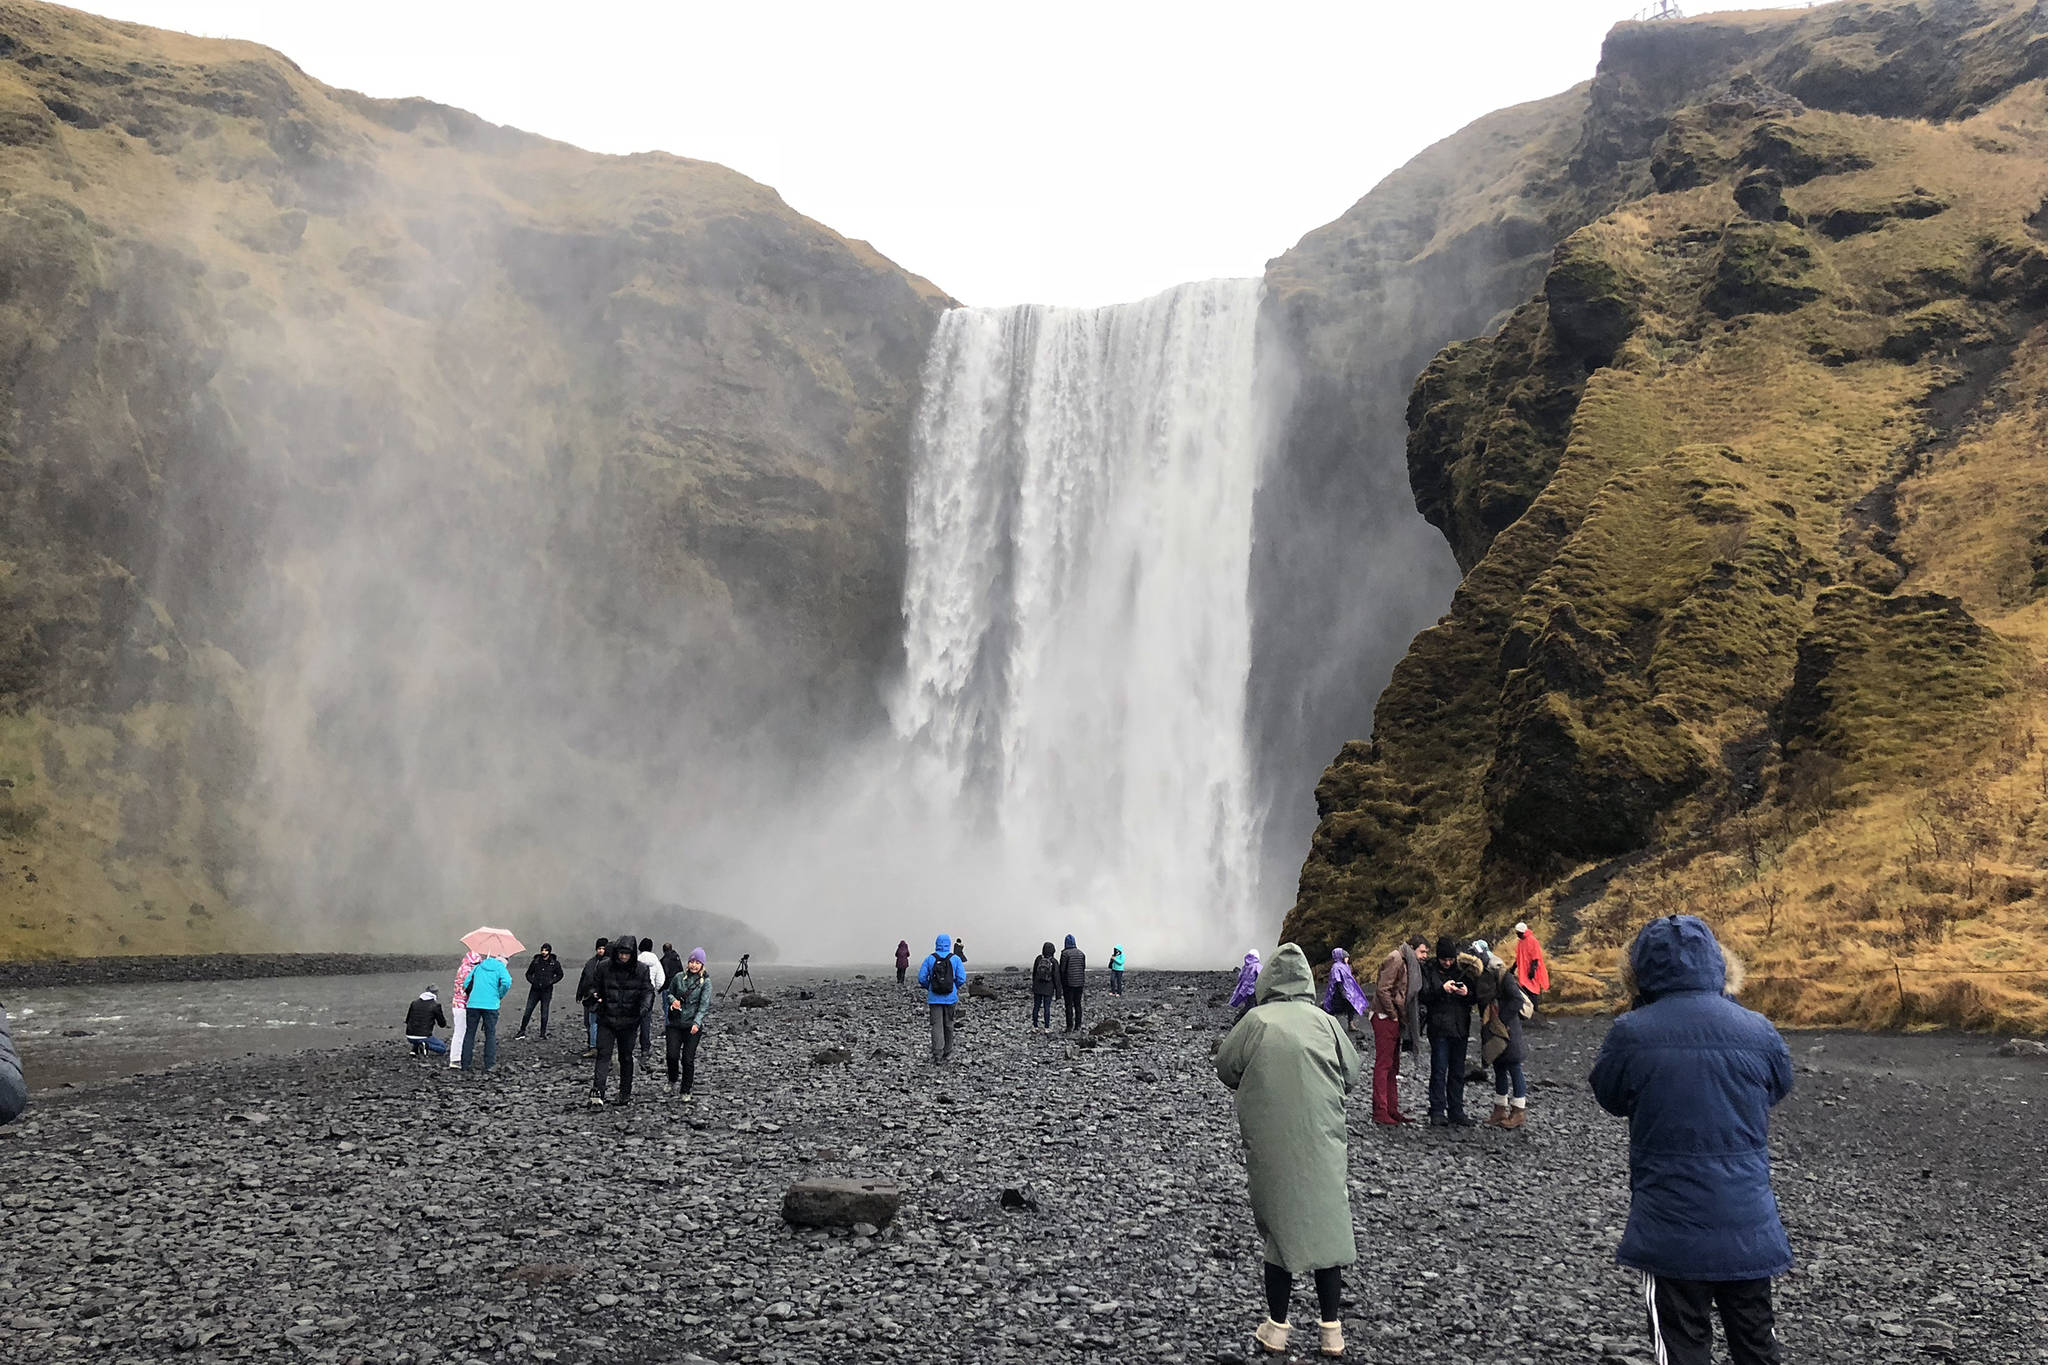 Tourists gather at a waterfall in Iceland, November 2018. (Emily Russo Miller | Juneau Empire)